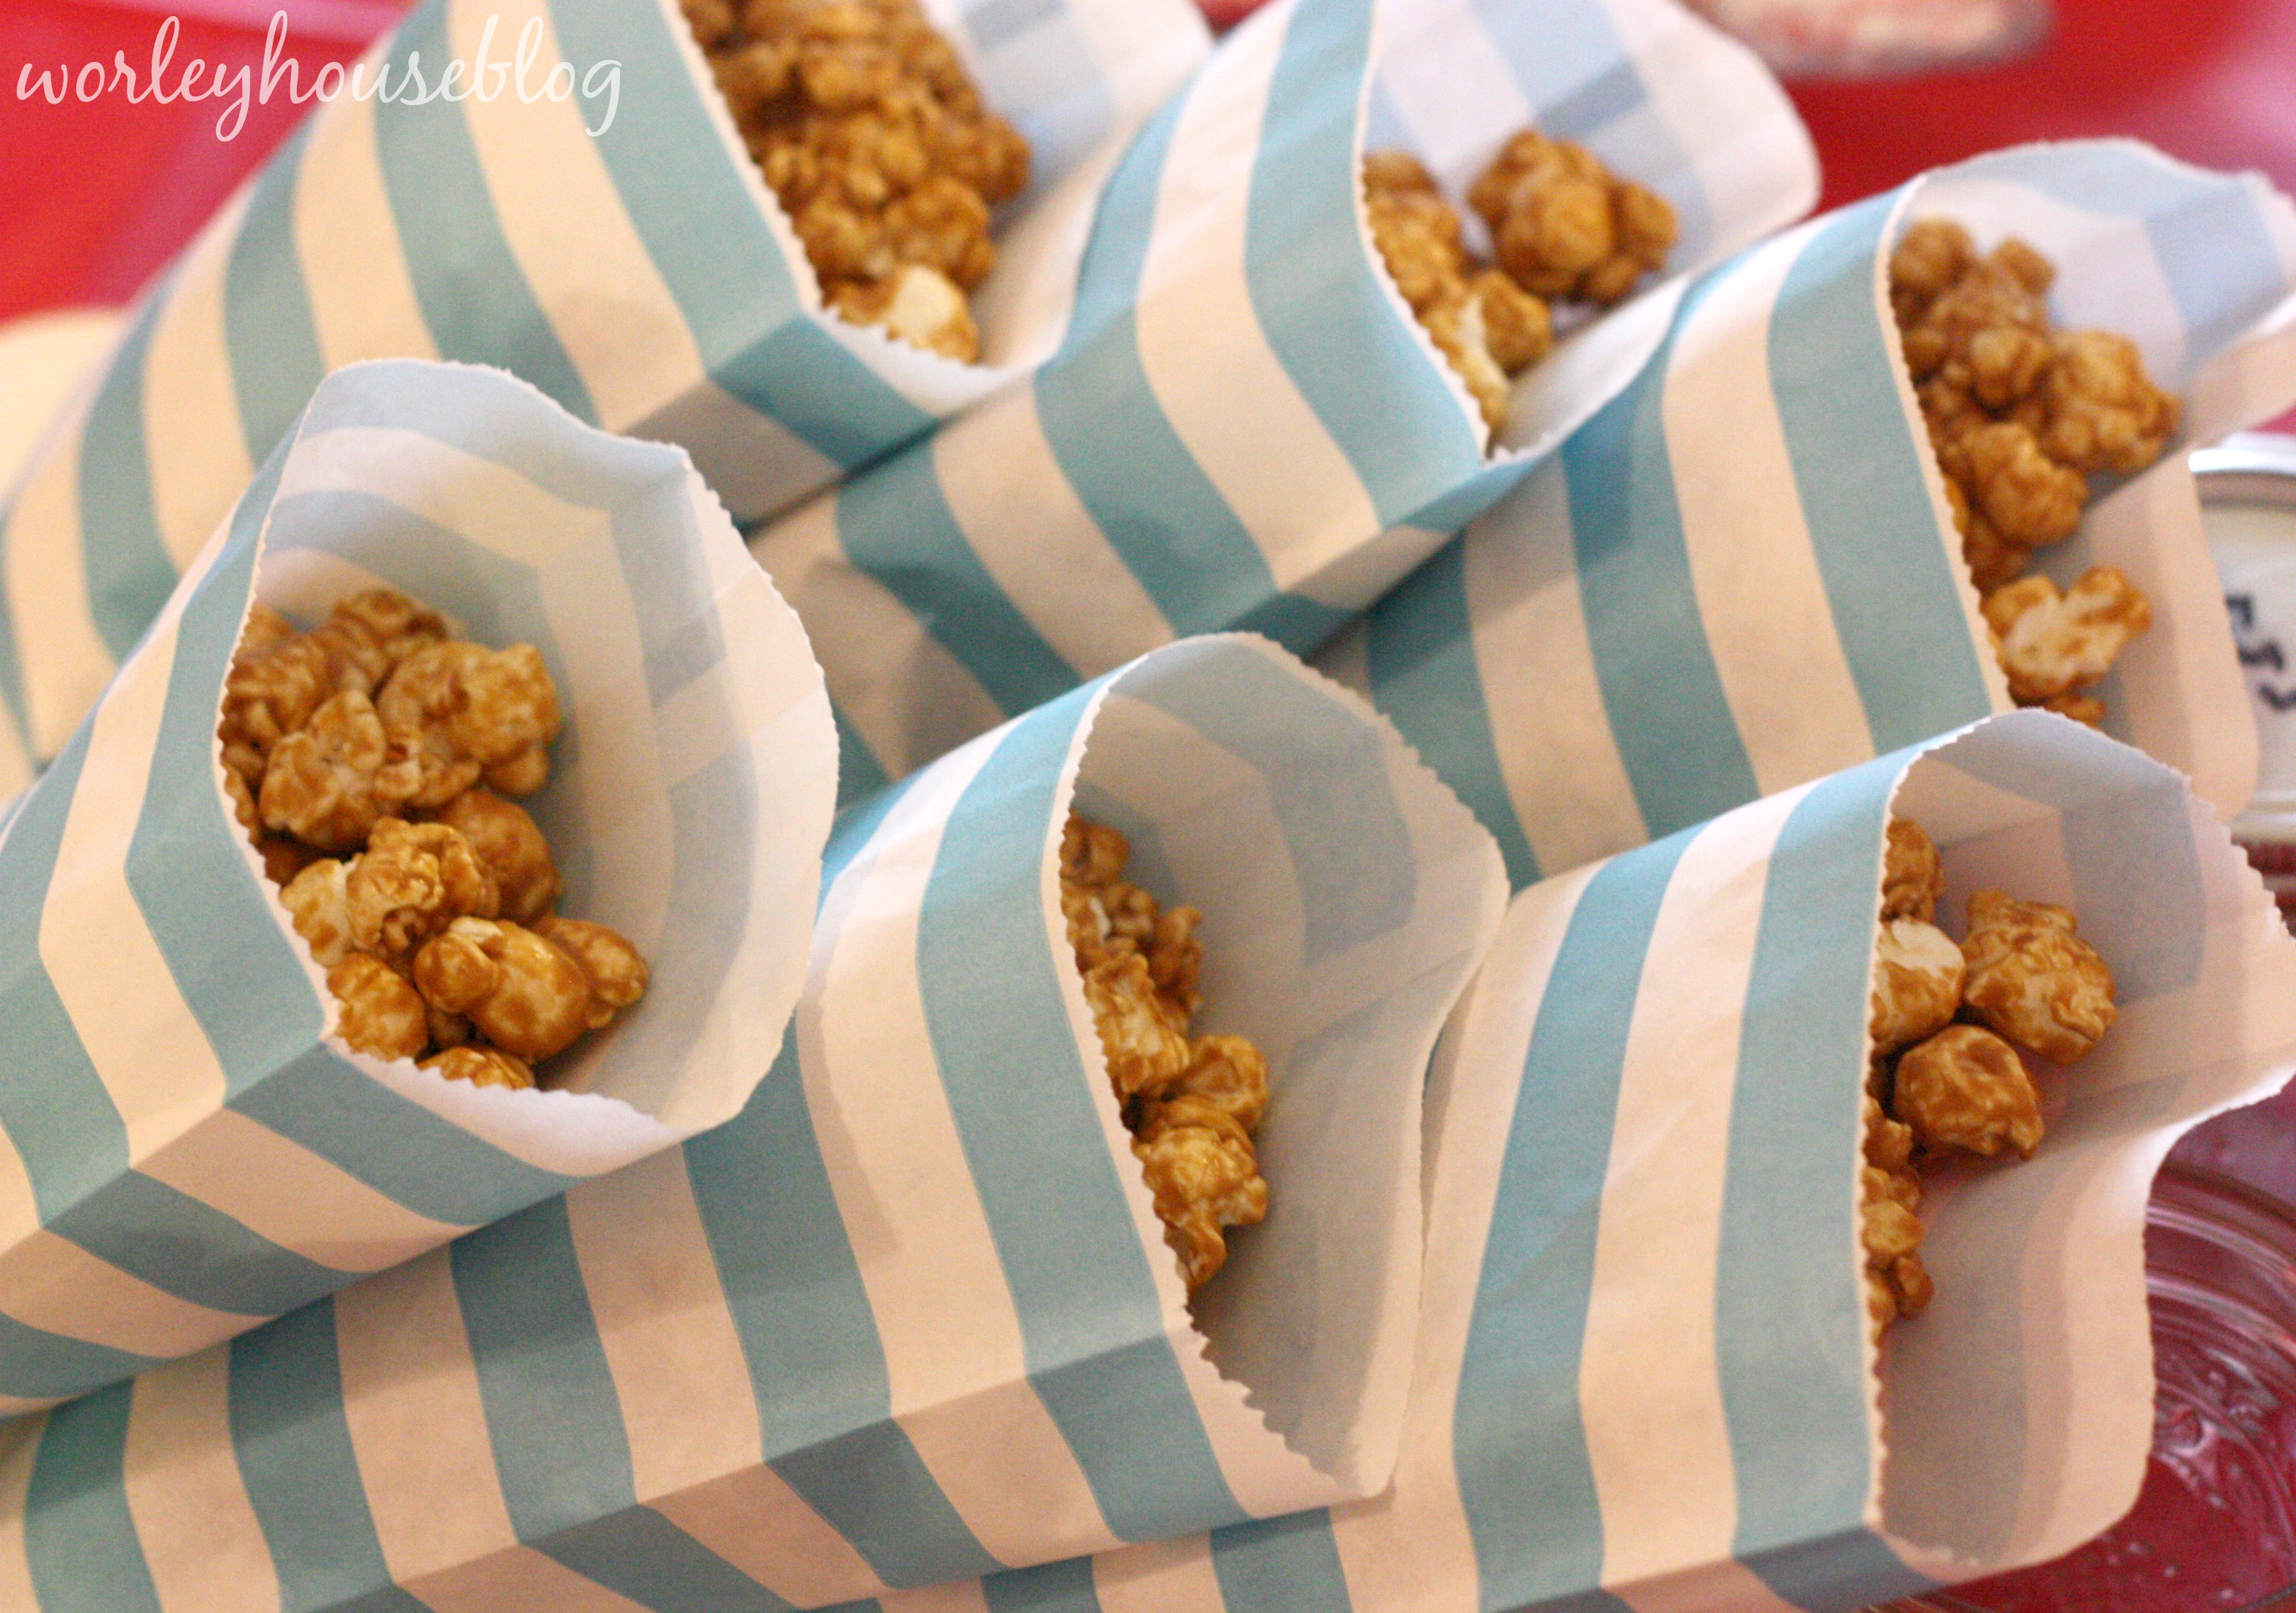 Blue + White Striped Bags with Carmel Corn